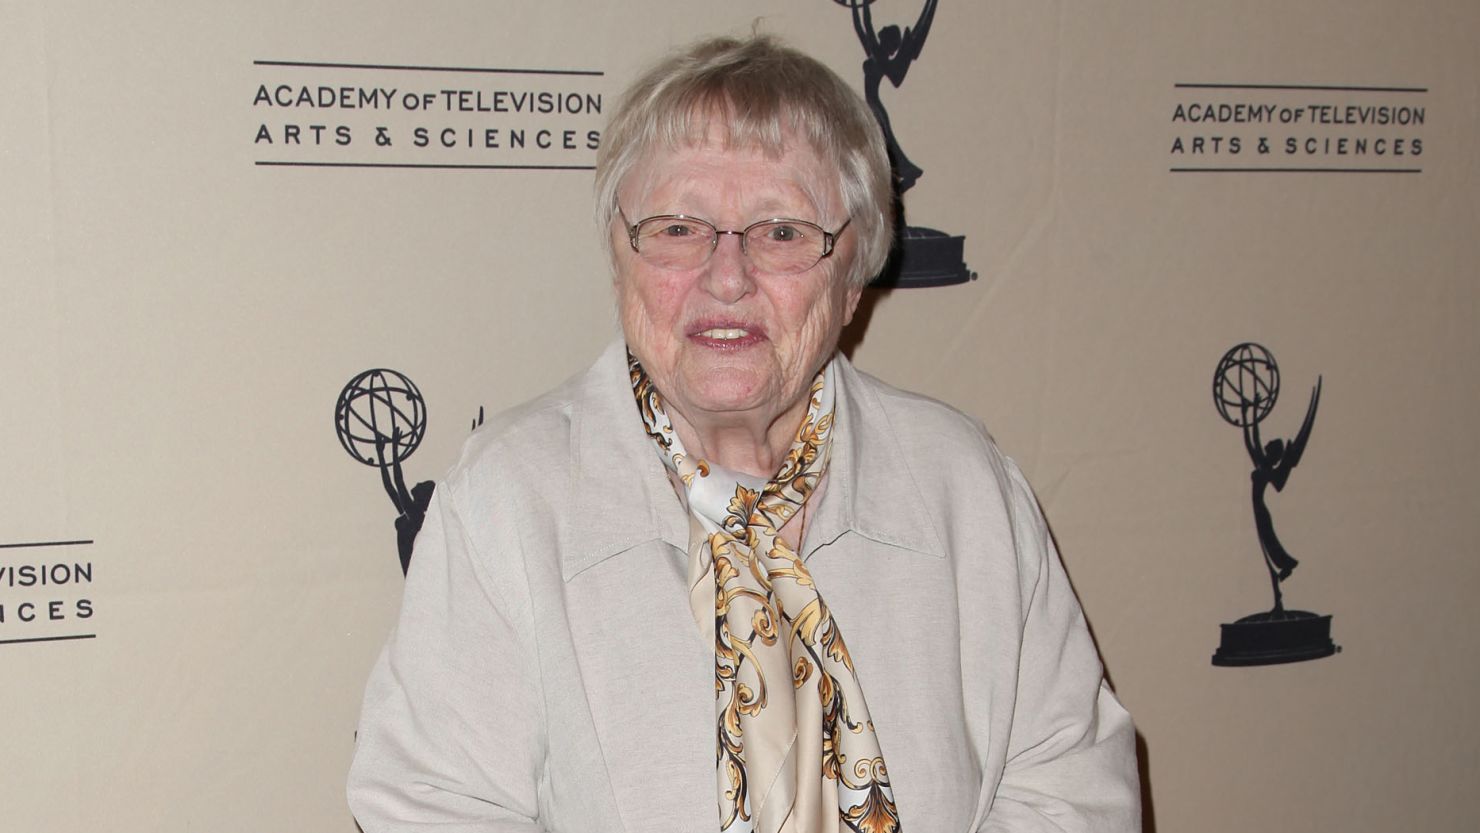 Pat Carroll attends "Retire From Showbiz:? No Thanks!" at the Academy of Television Arts & Sciences Conference Centre in North Hollywood, California on January 31, 2013.  